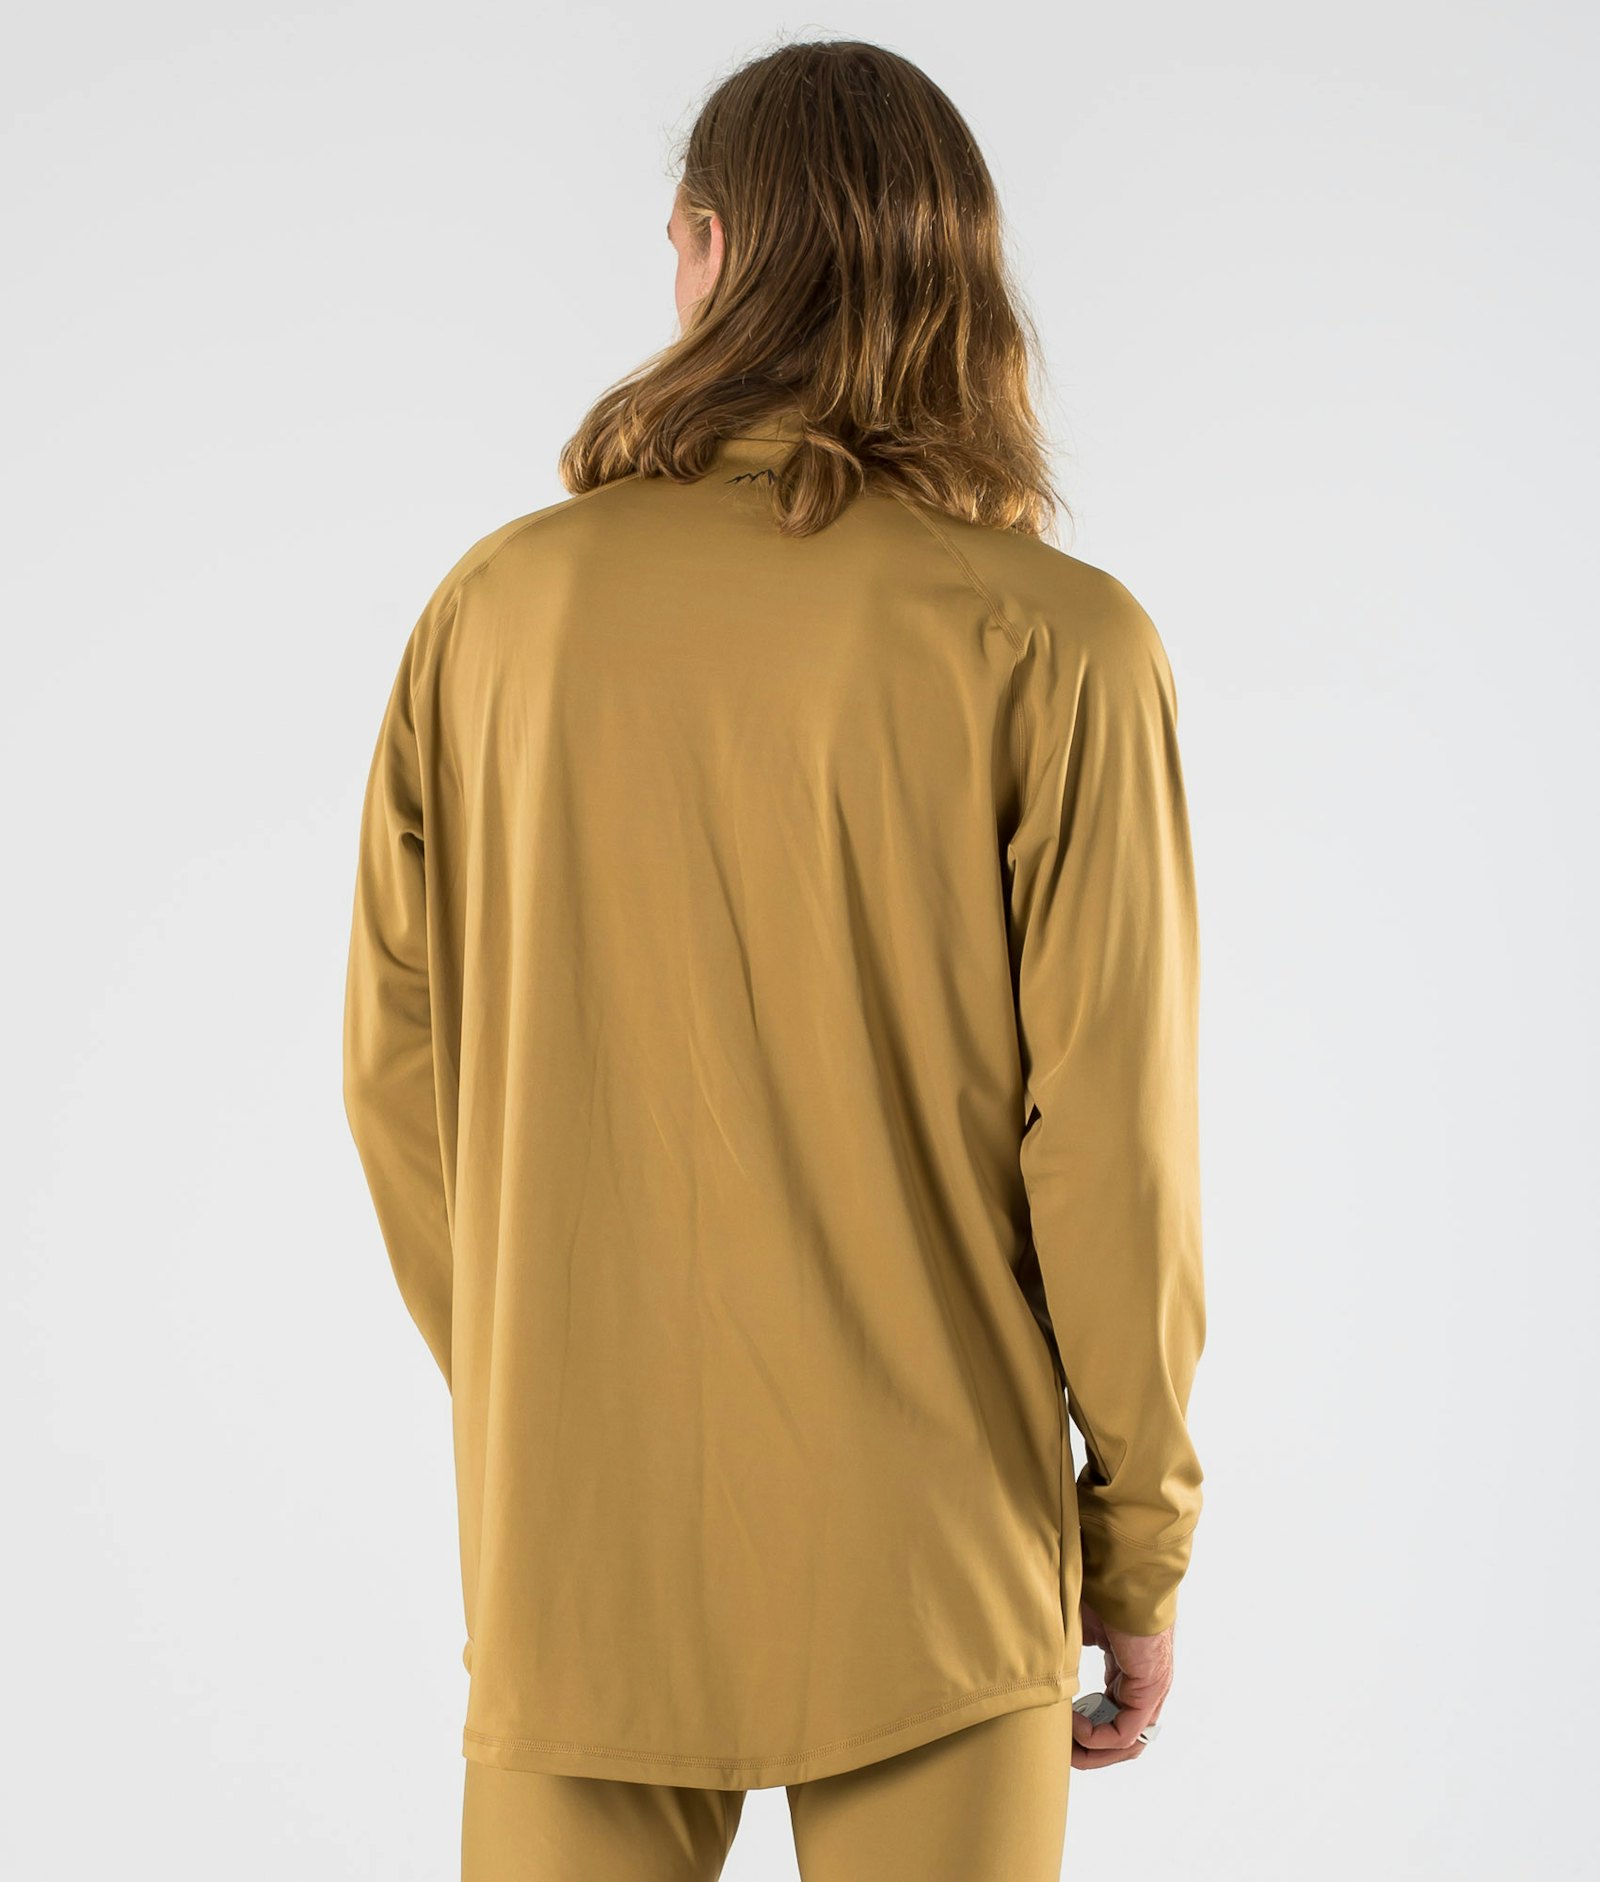 Snuggle Base Layer Top Men 2X-Up Gold, Image 2 of 5